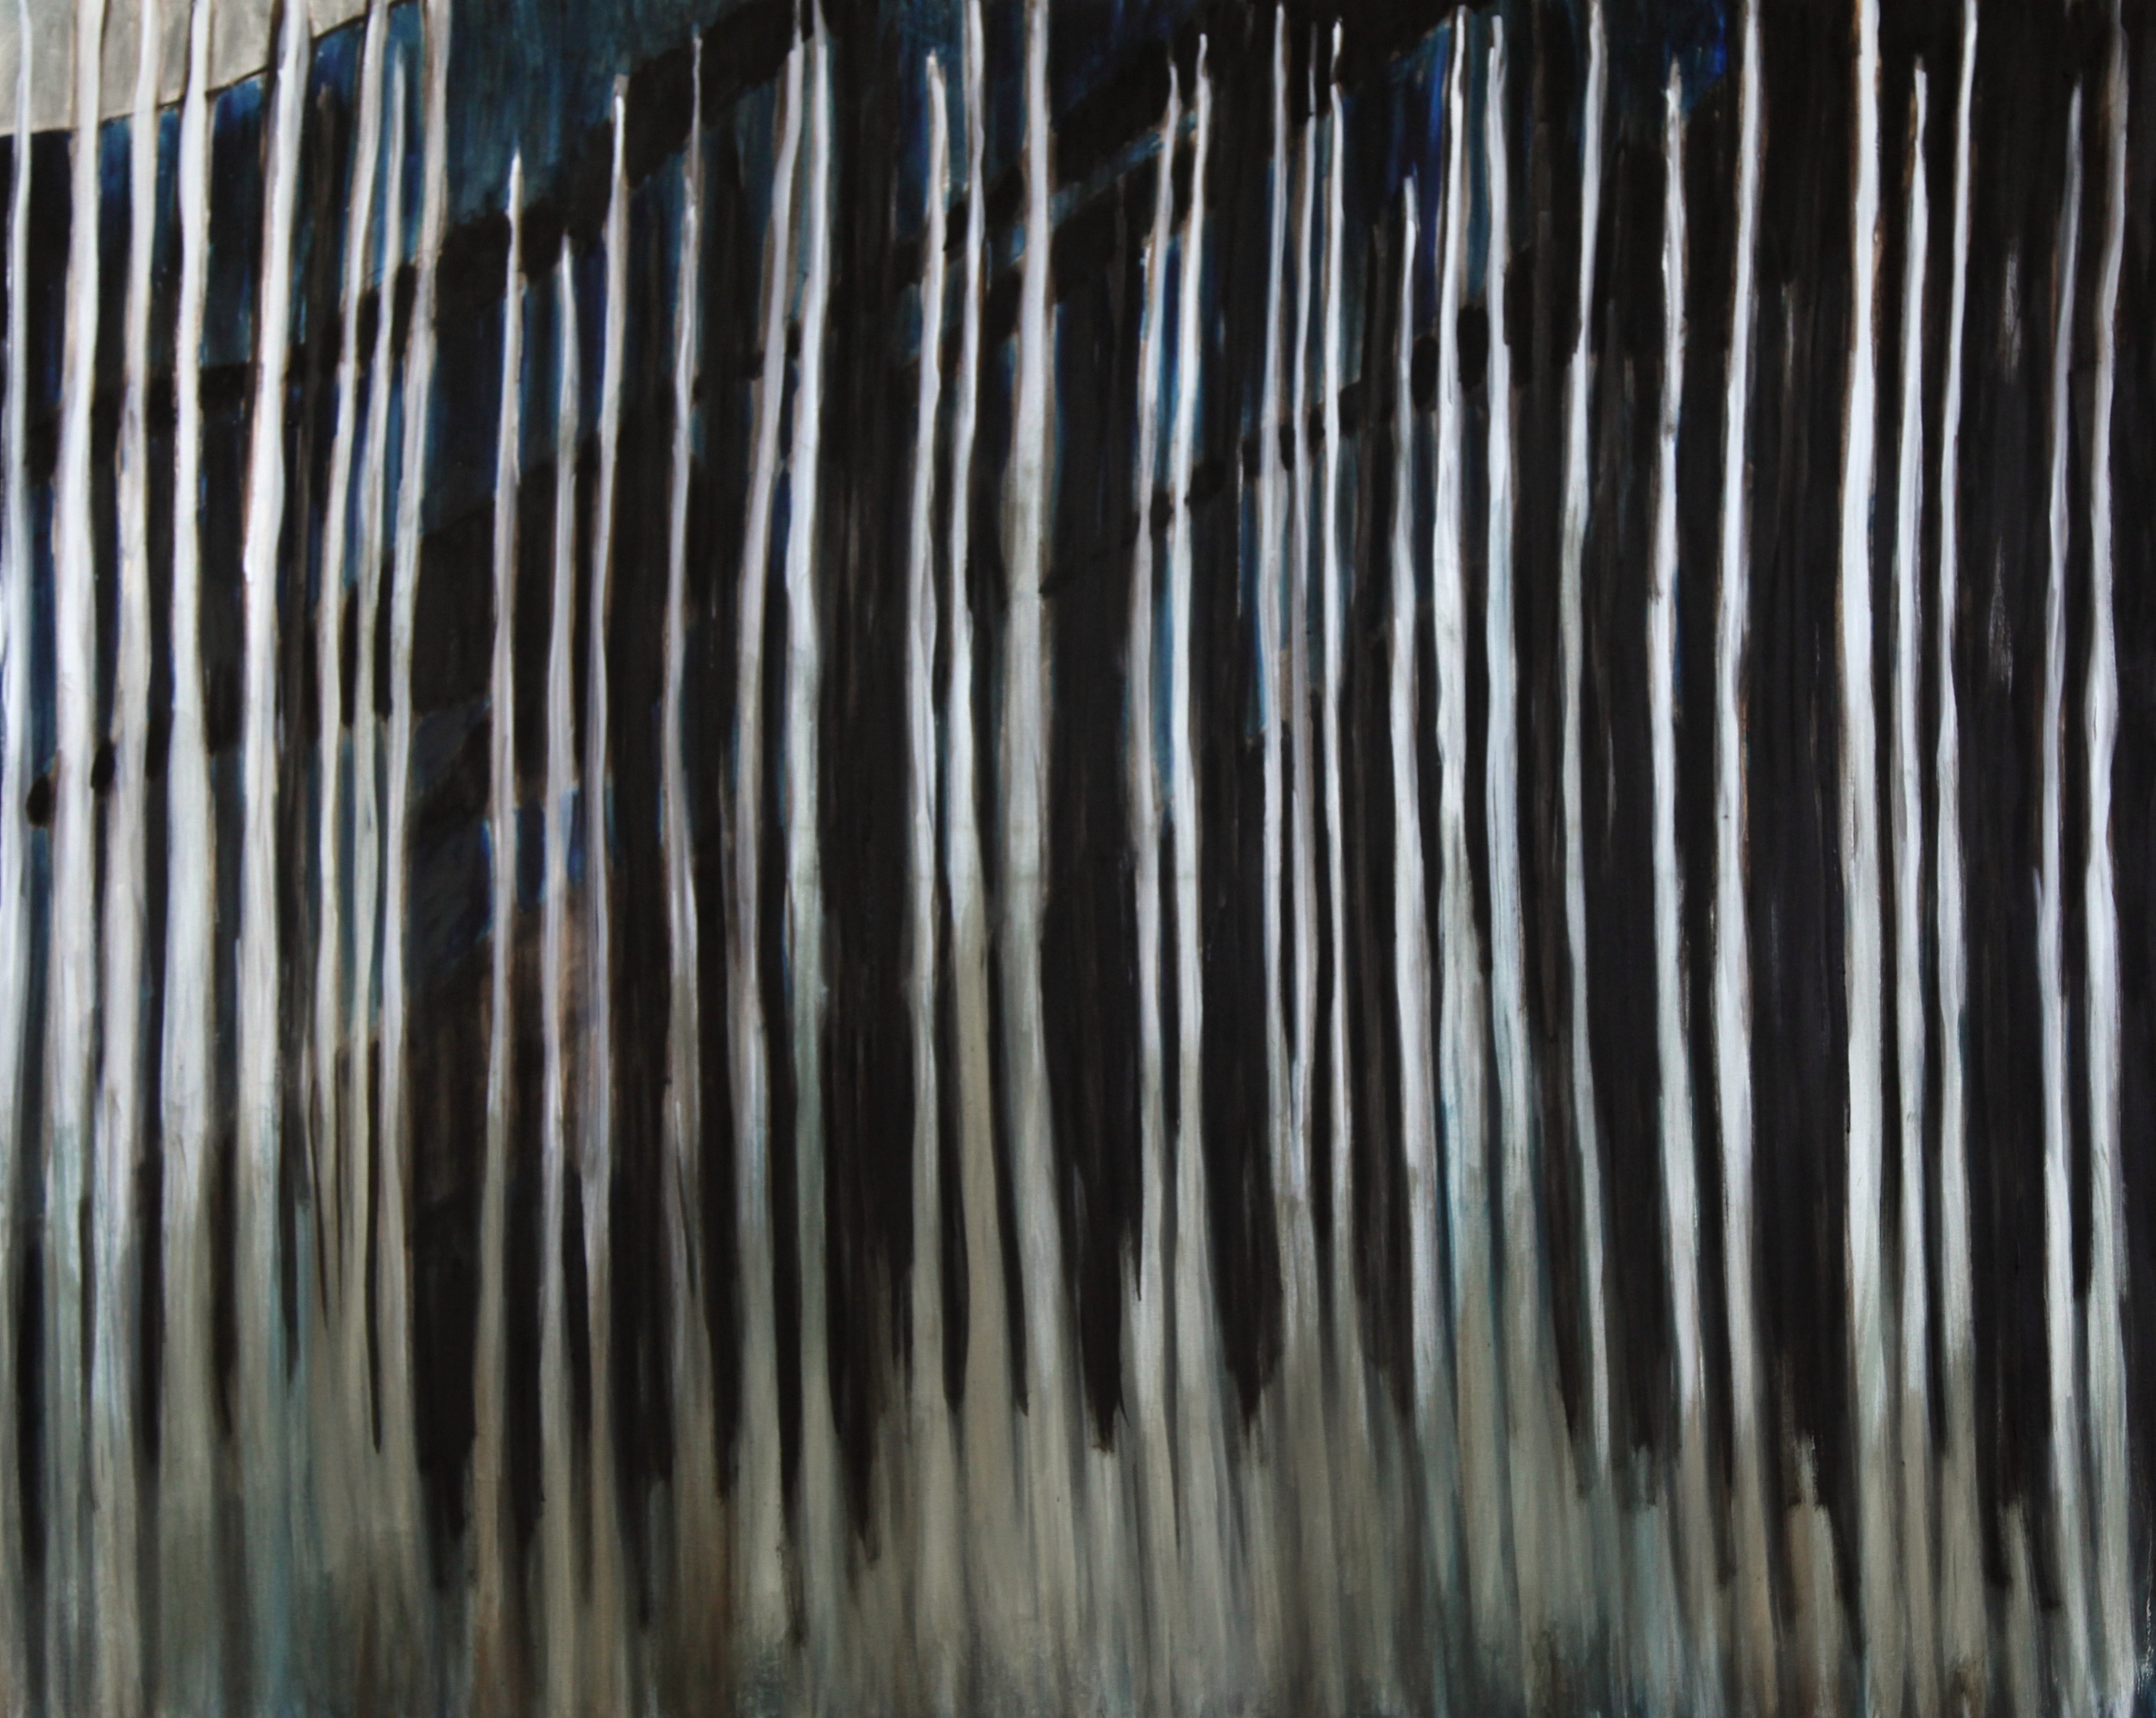   Yellowstone: Silver Trees   oil on canvas  48" x 60”  2015  SOLD 